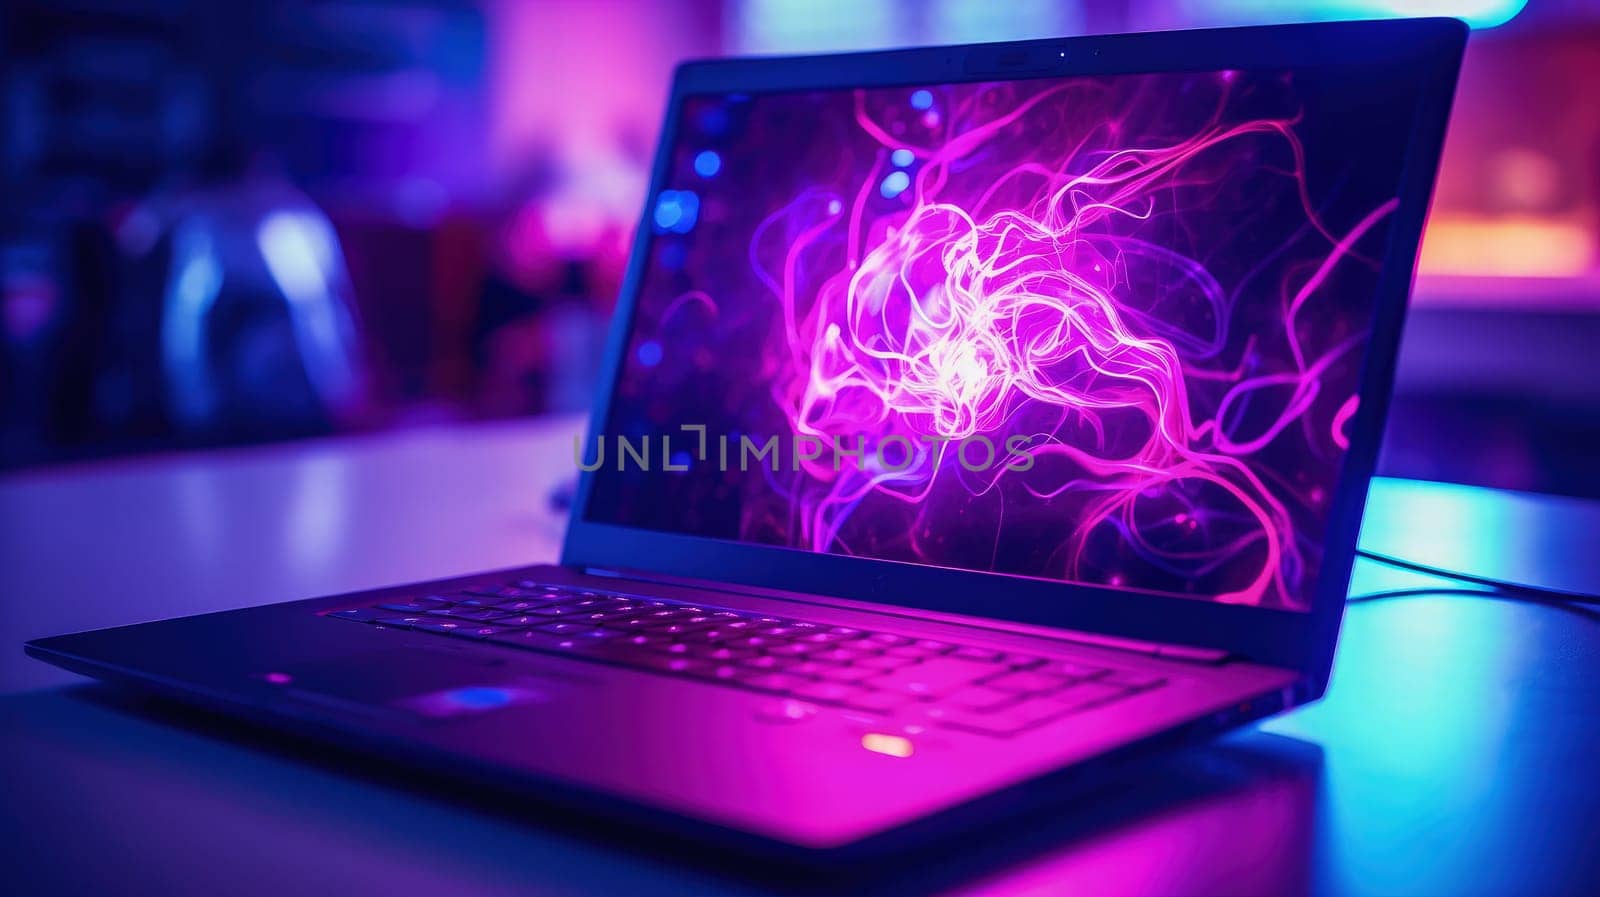 Neurons on a laptop screen in a purple neon room. The concept of artificial intelligence development. by Yurich32